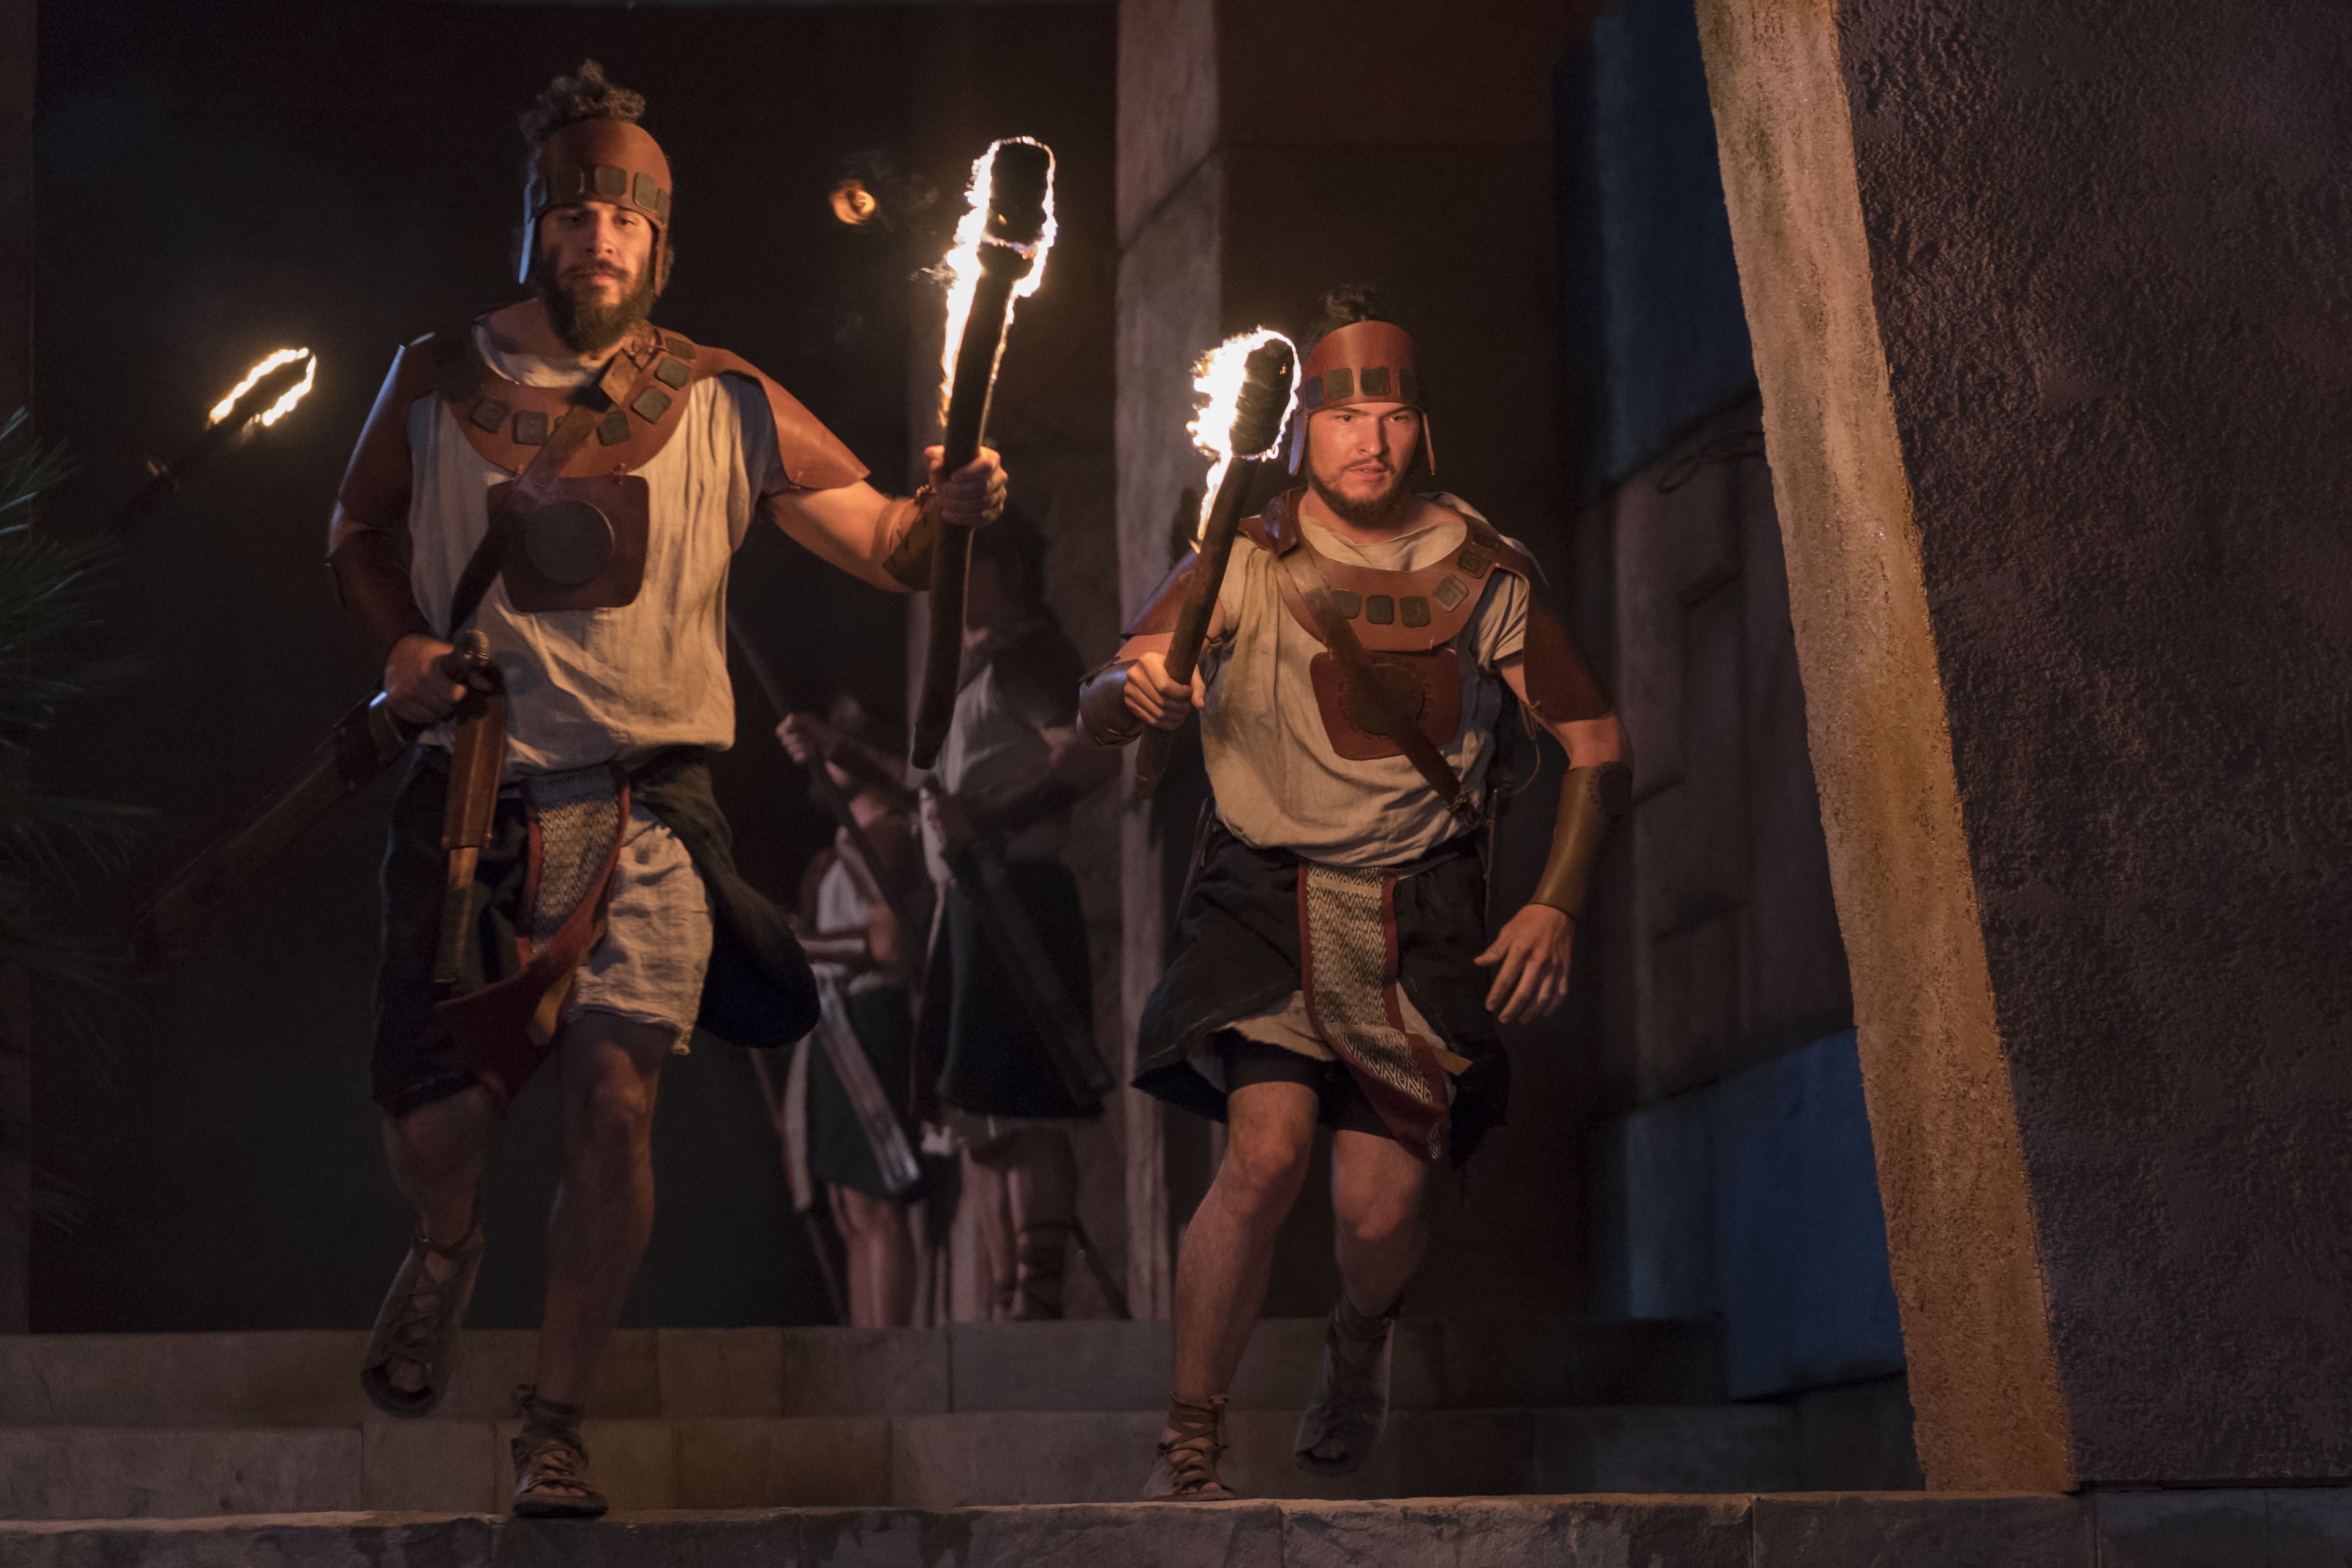 King Noah's guards run down a hall with torches in their hands.